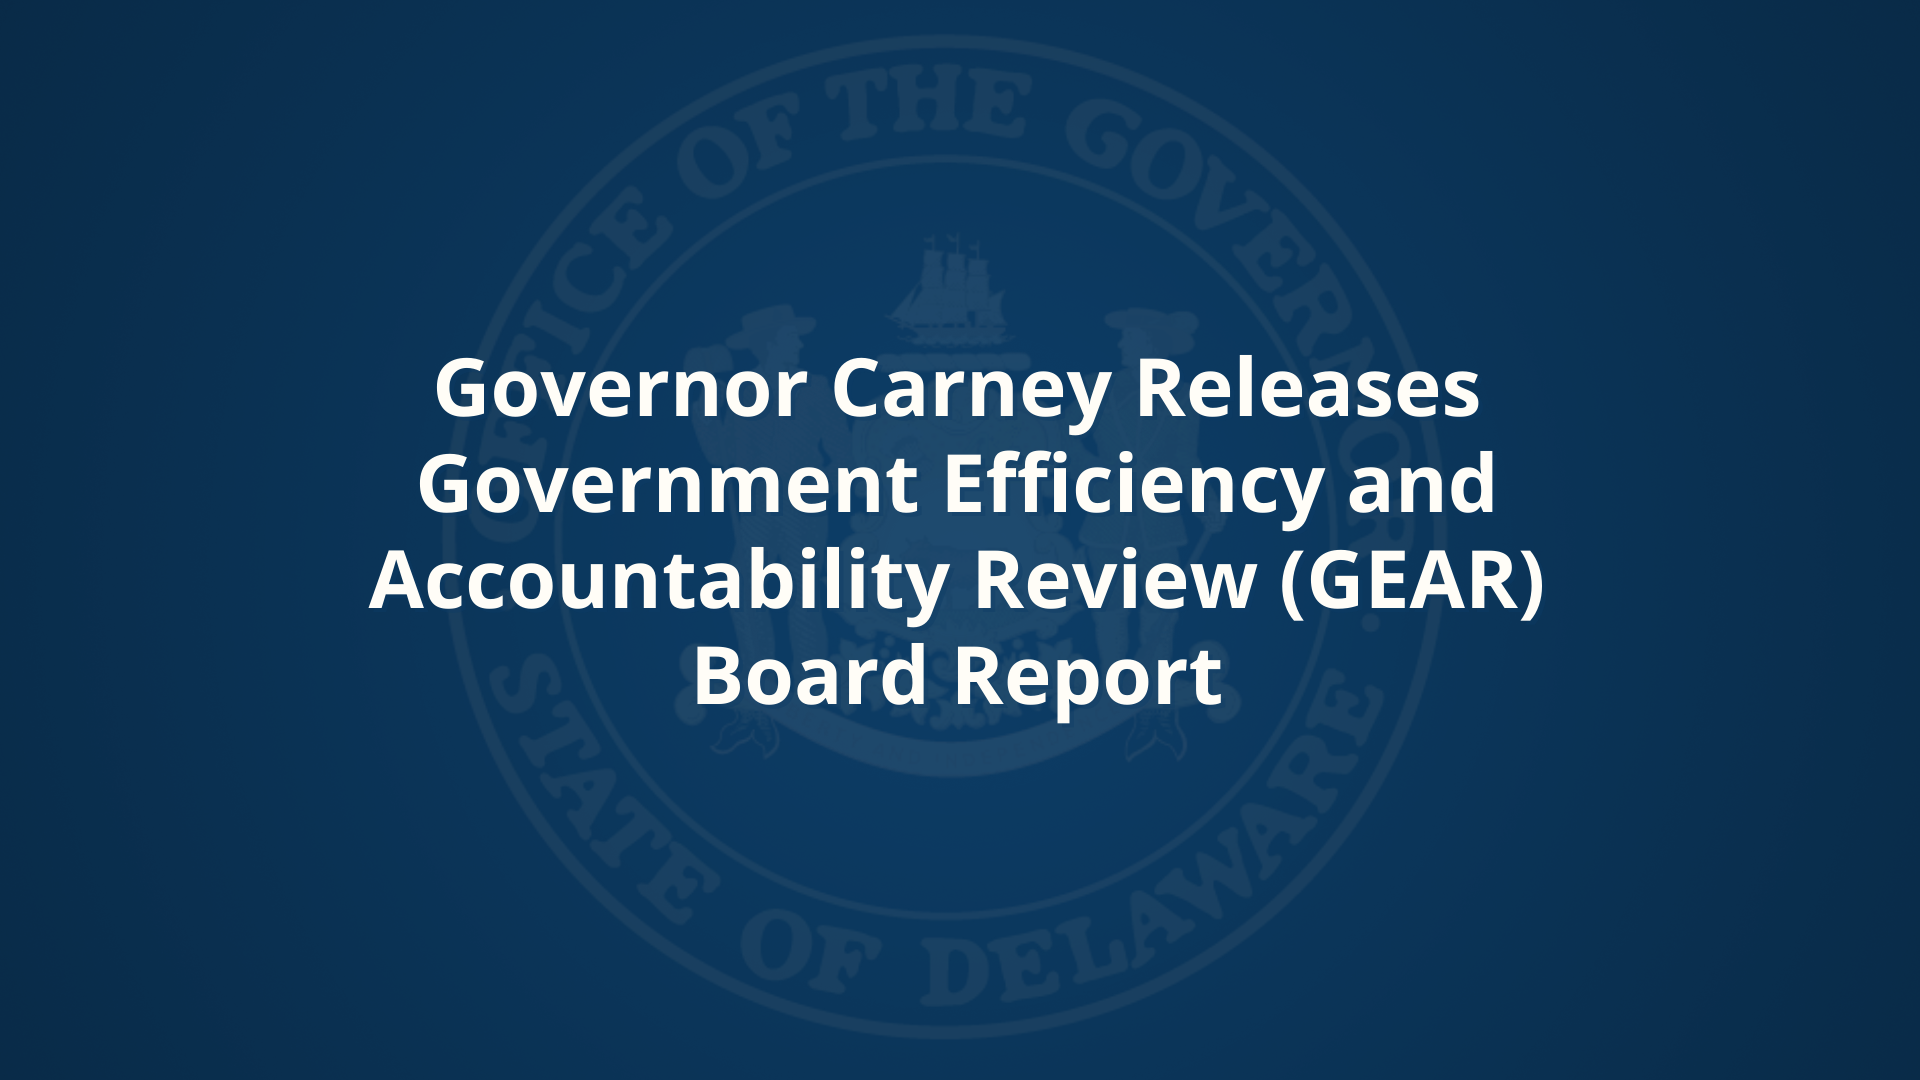 Governor Carney Releases GEAR Board Report